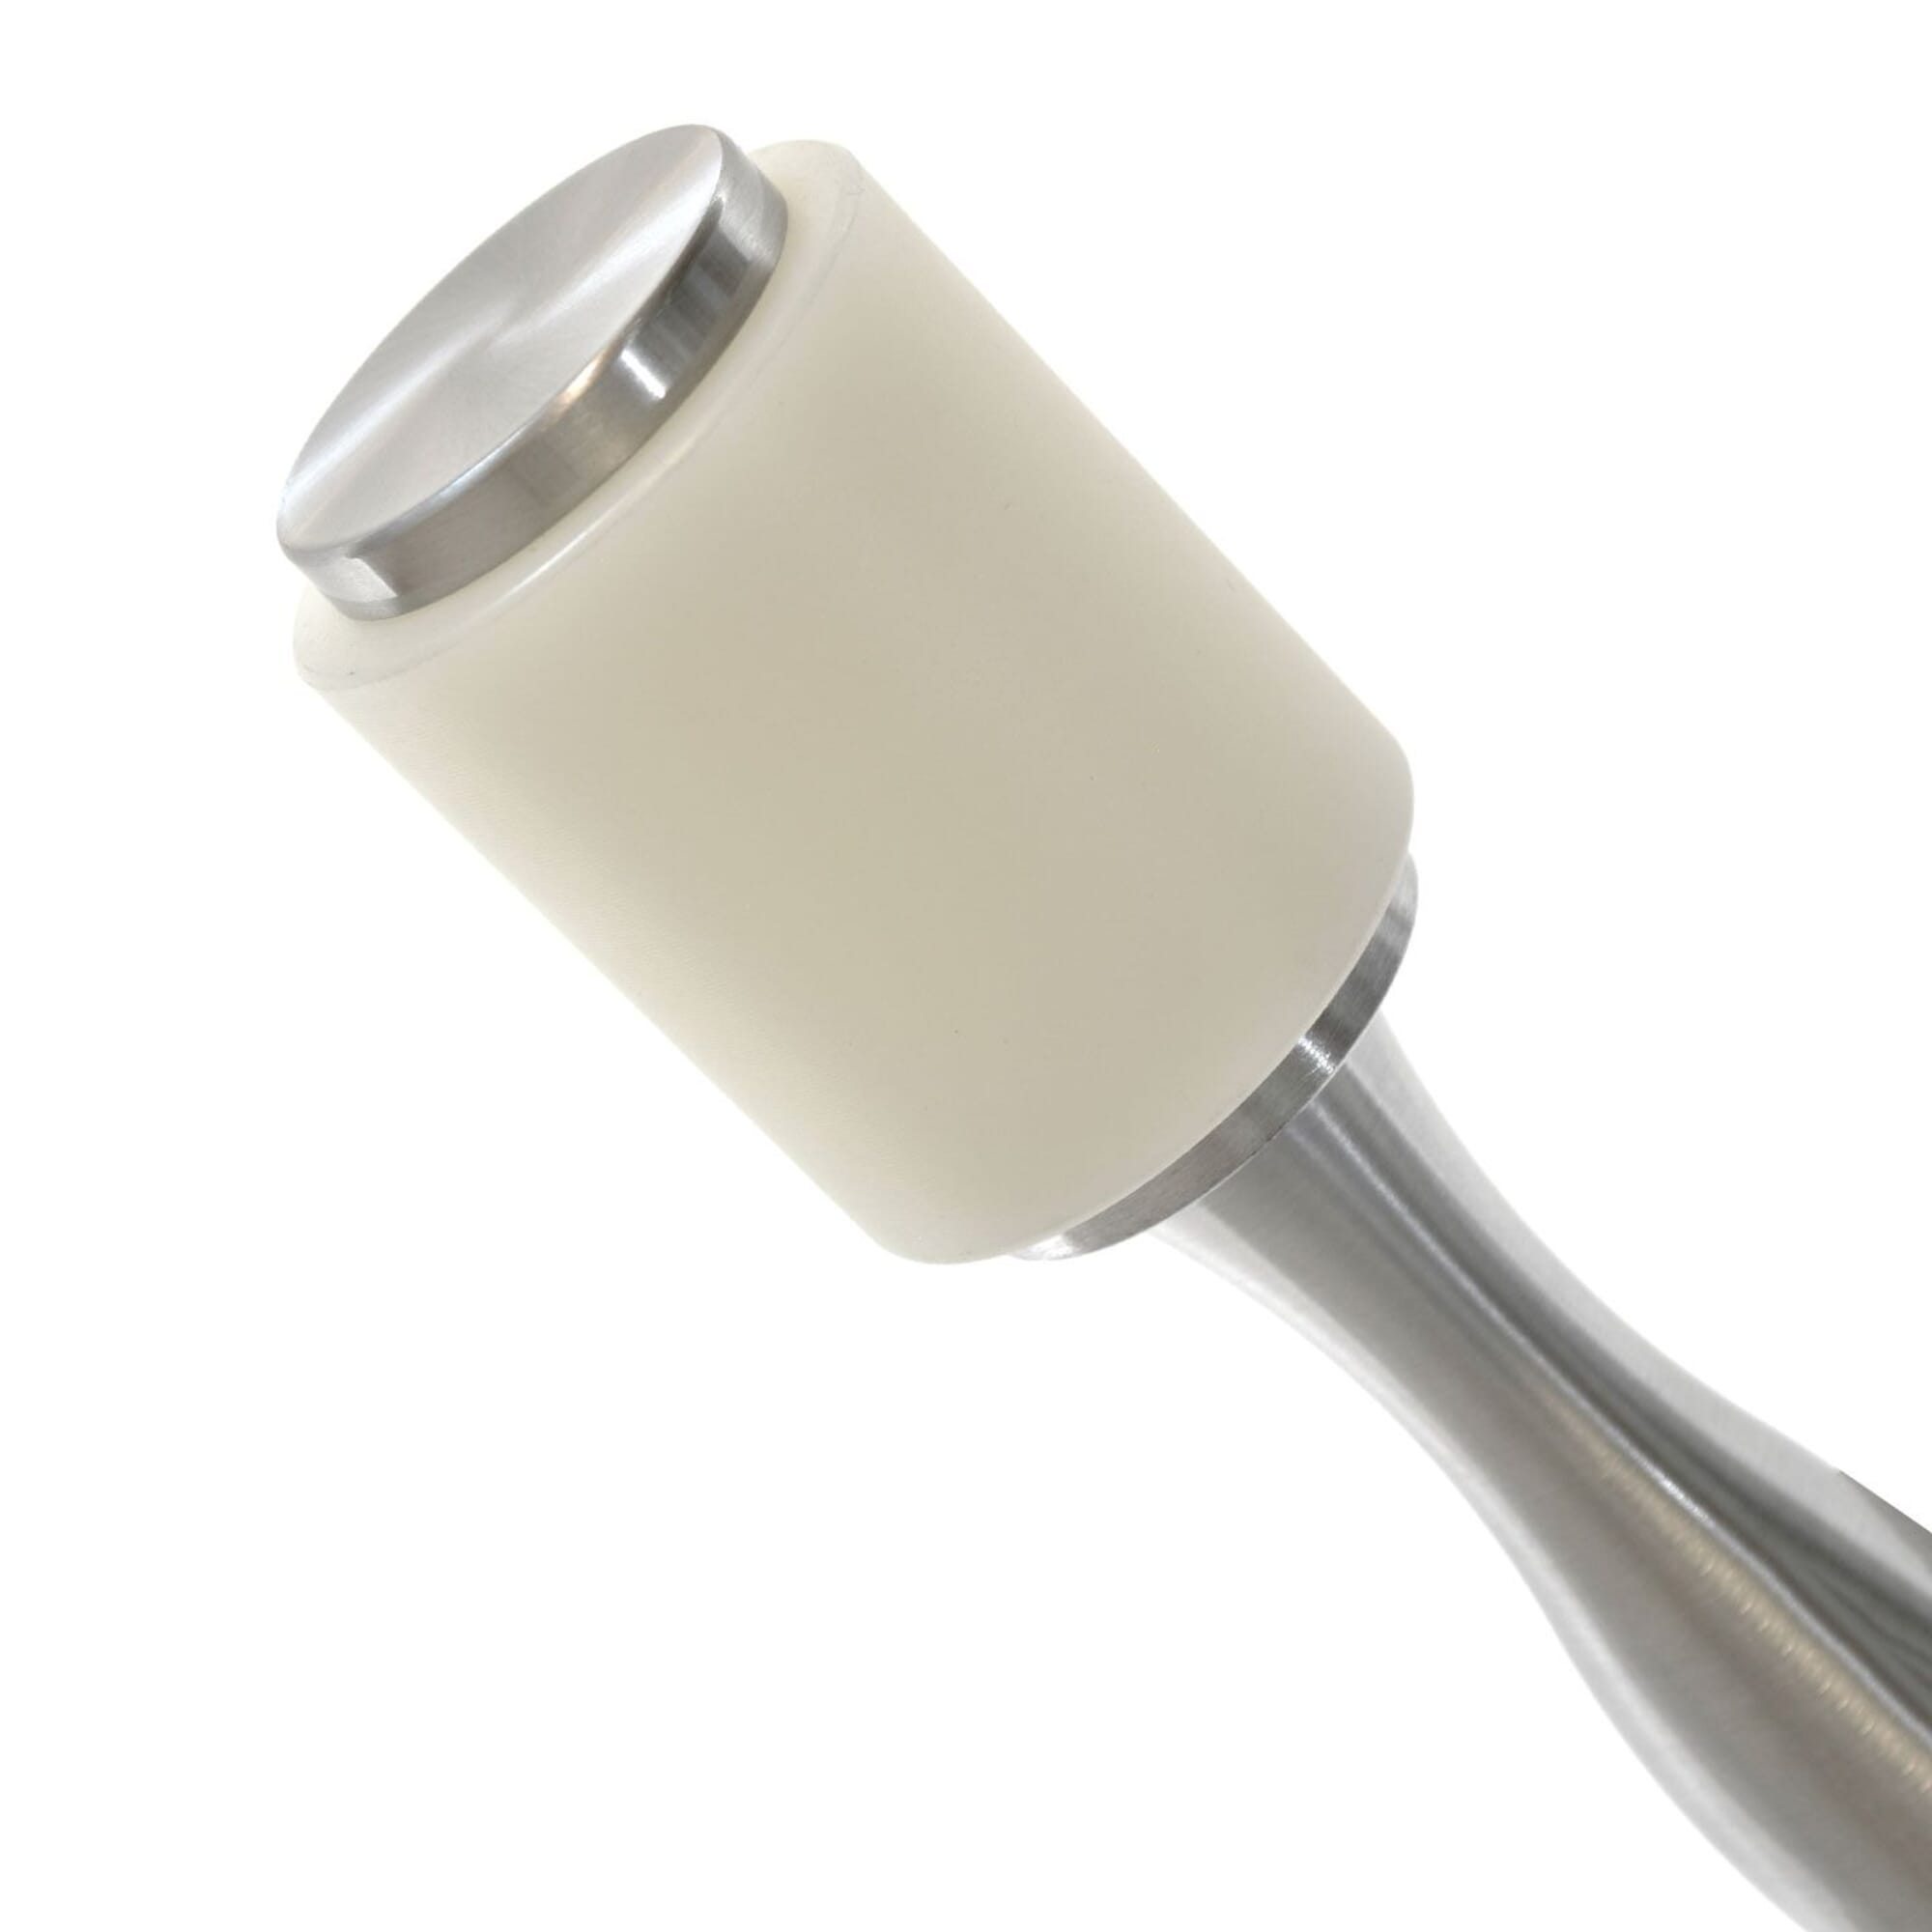 Leathercraft Mallet 50x190mm 313g Round Hammer Maul, with Aluminium Handle  and Nylon Head, for Leather Stamping and Carving